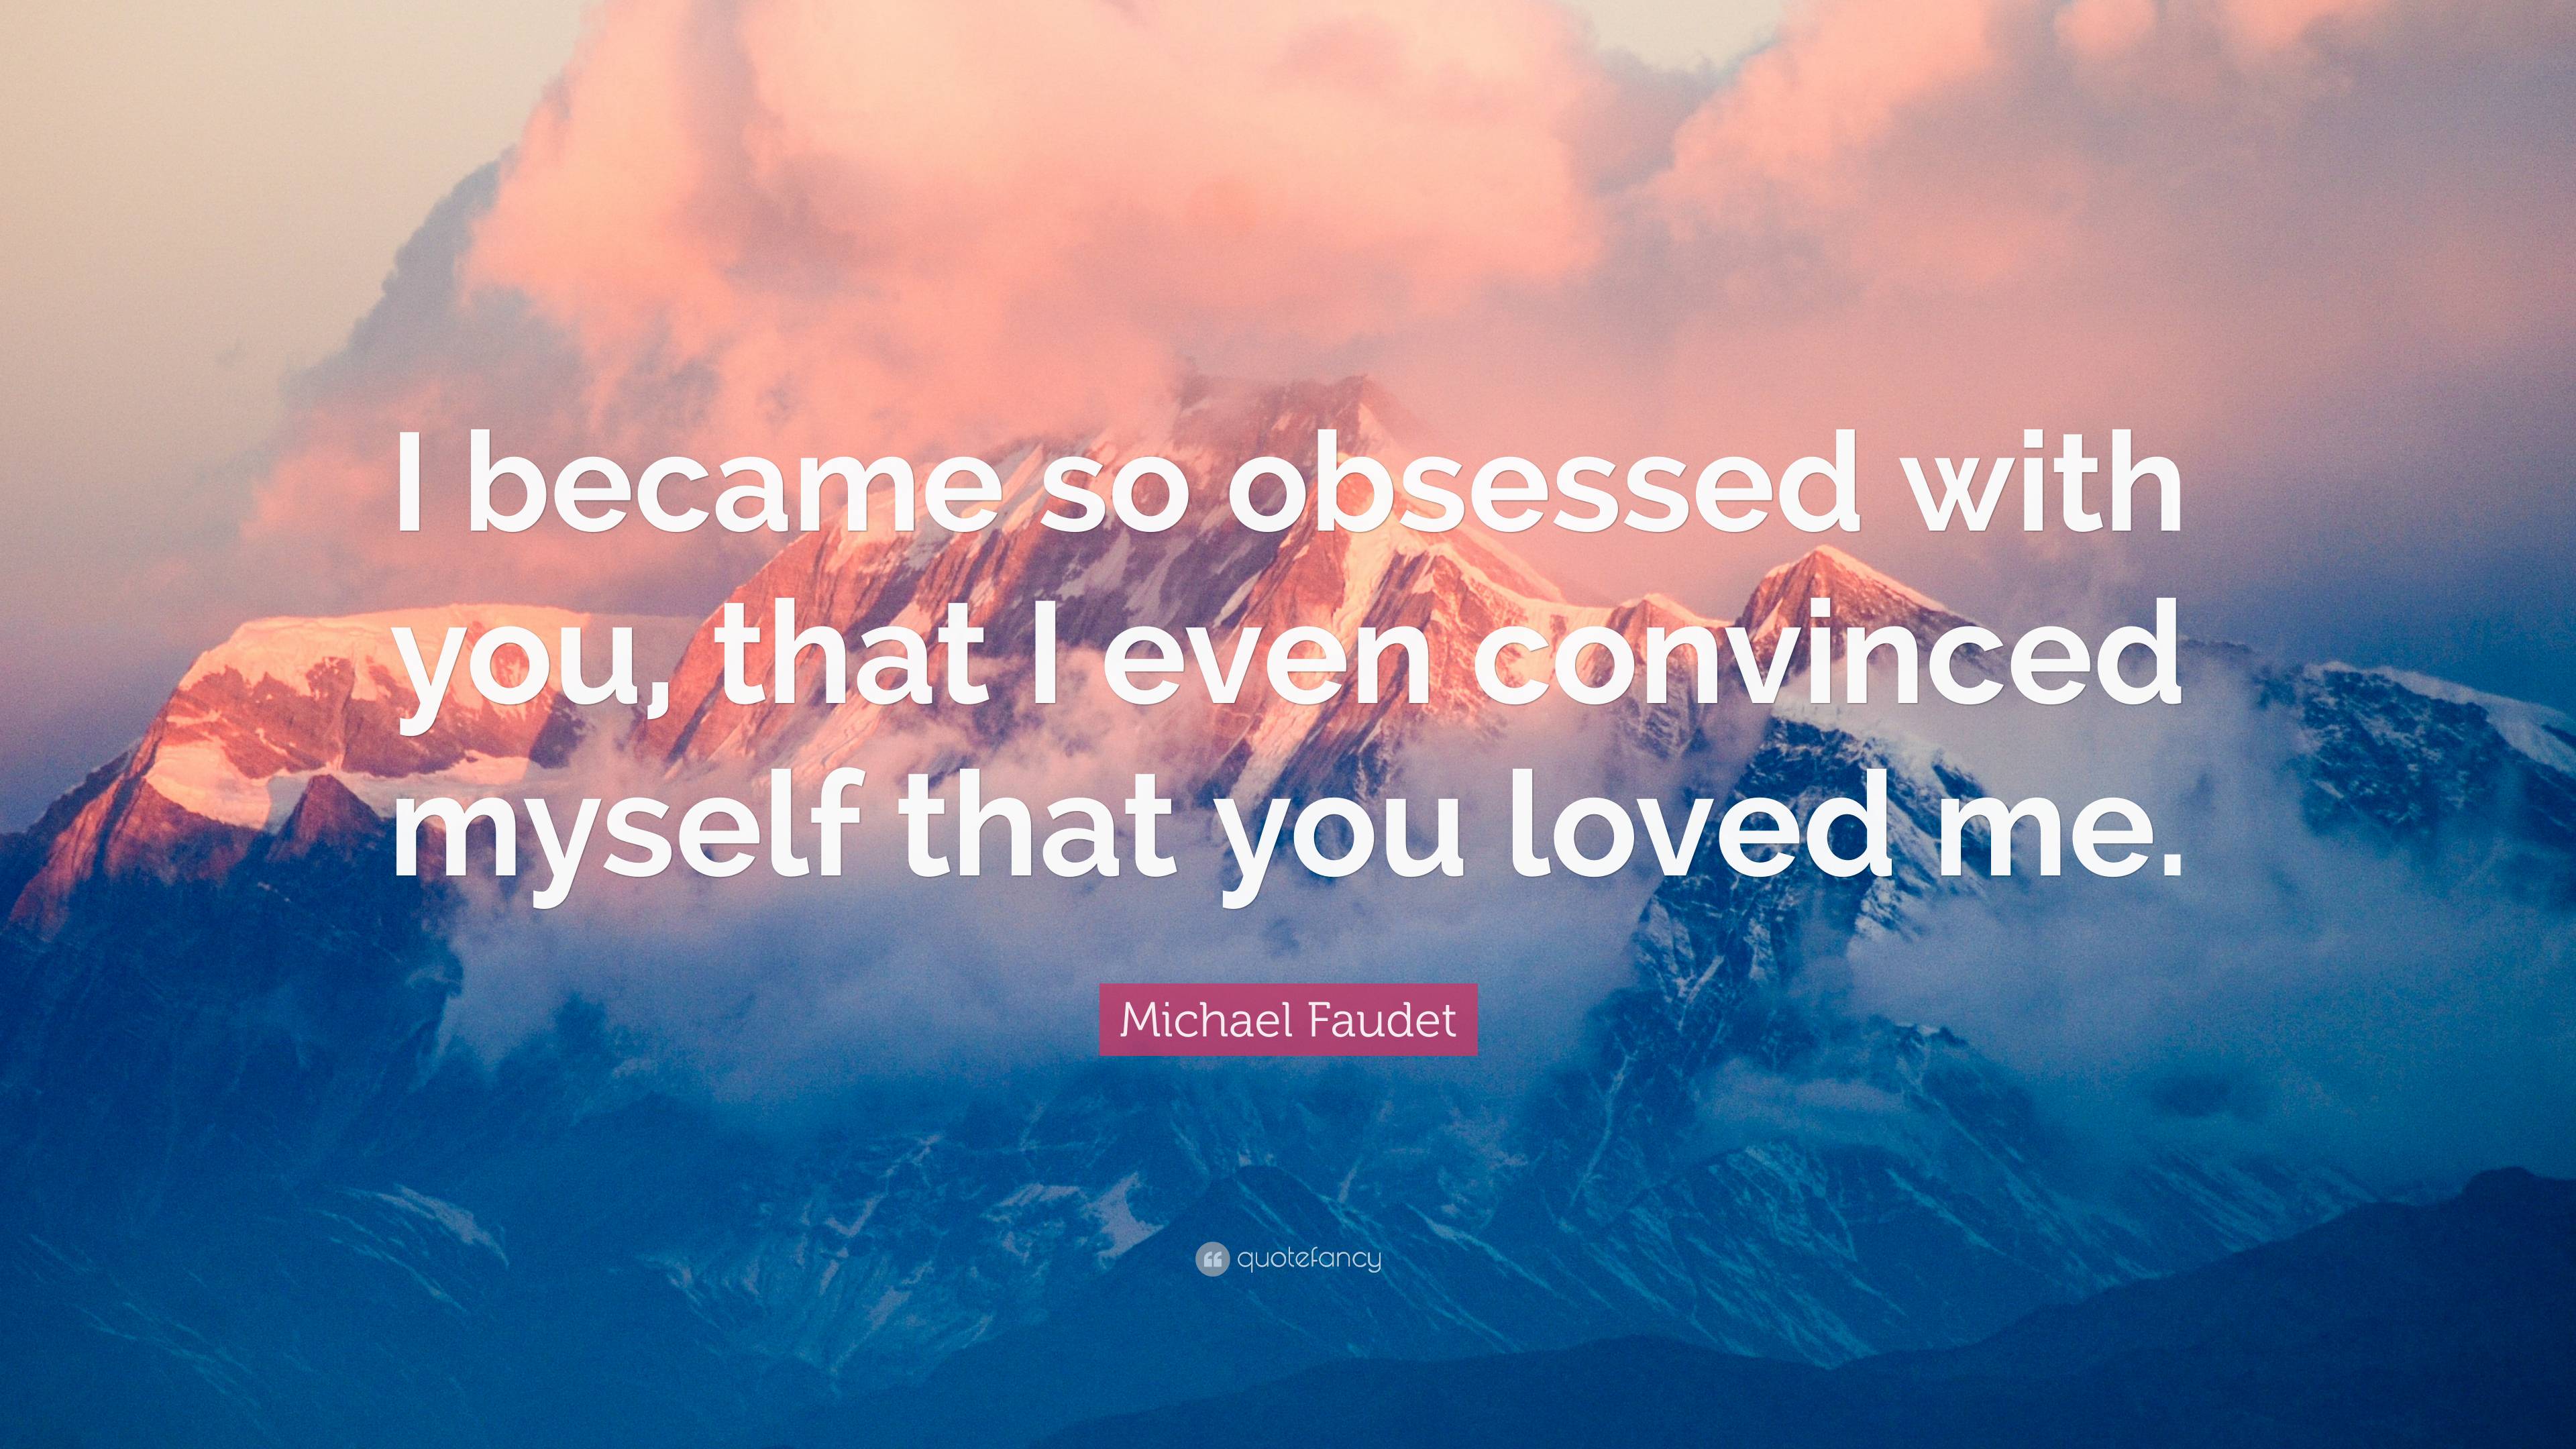 Michael Faudet Quote: “I became so obsessed with you, that I even